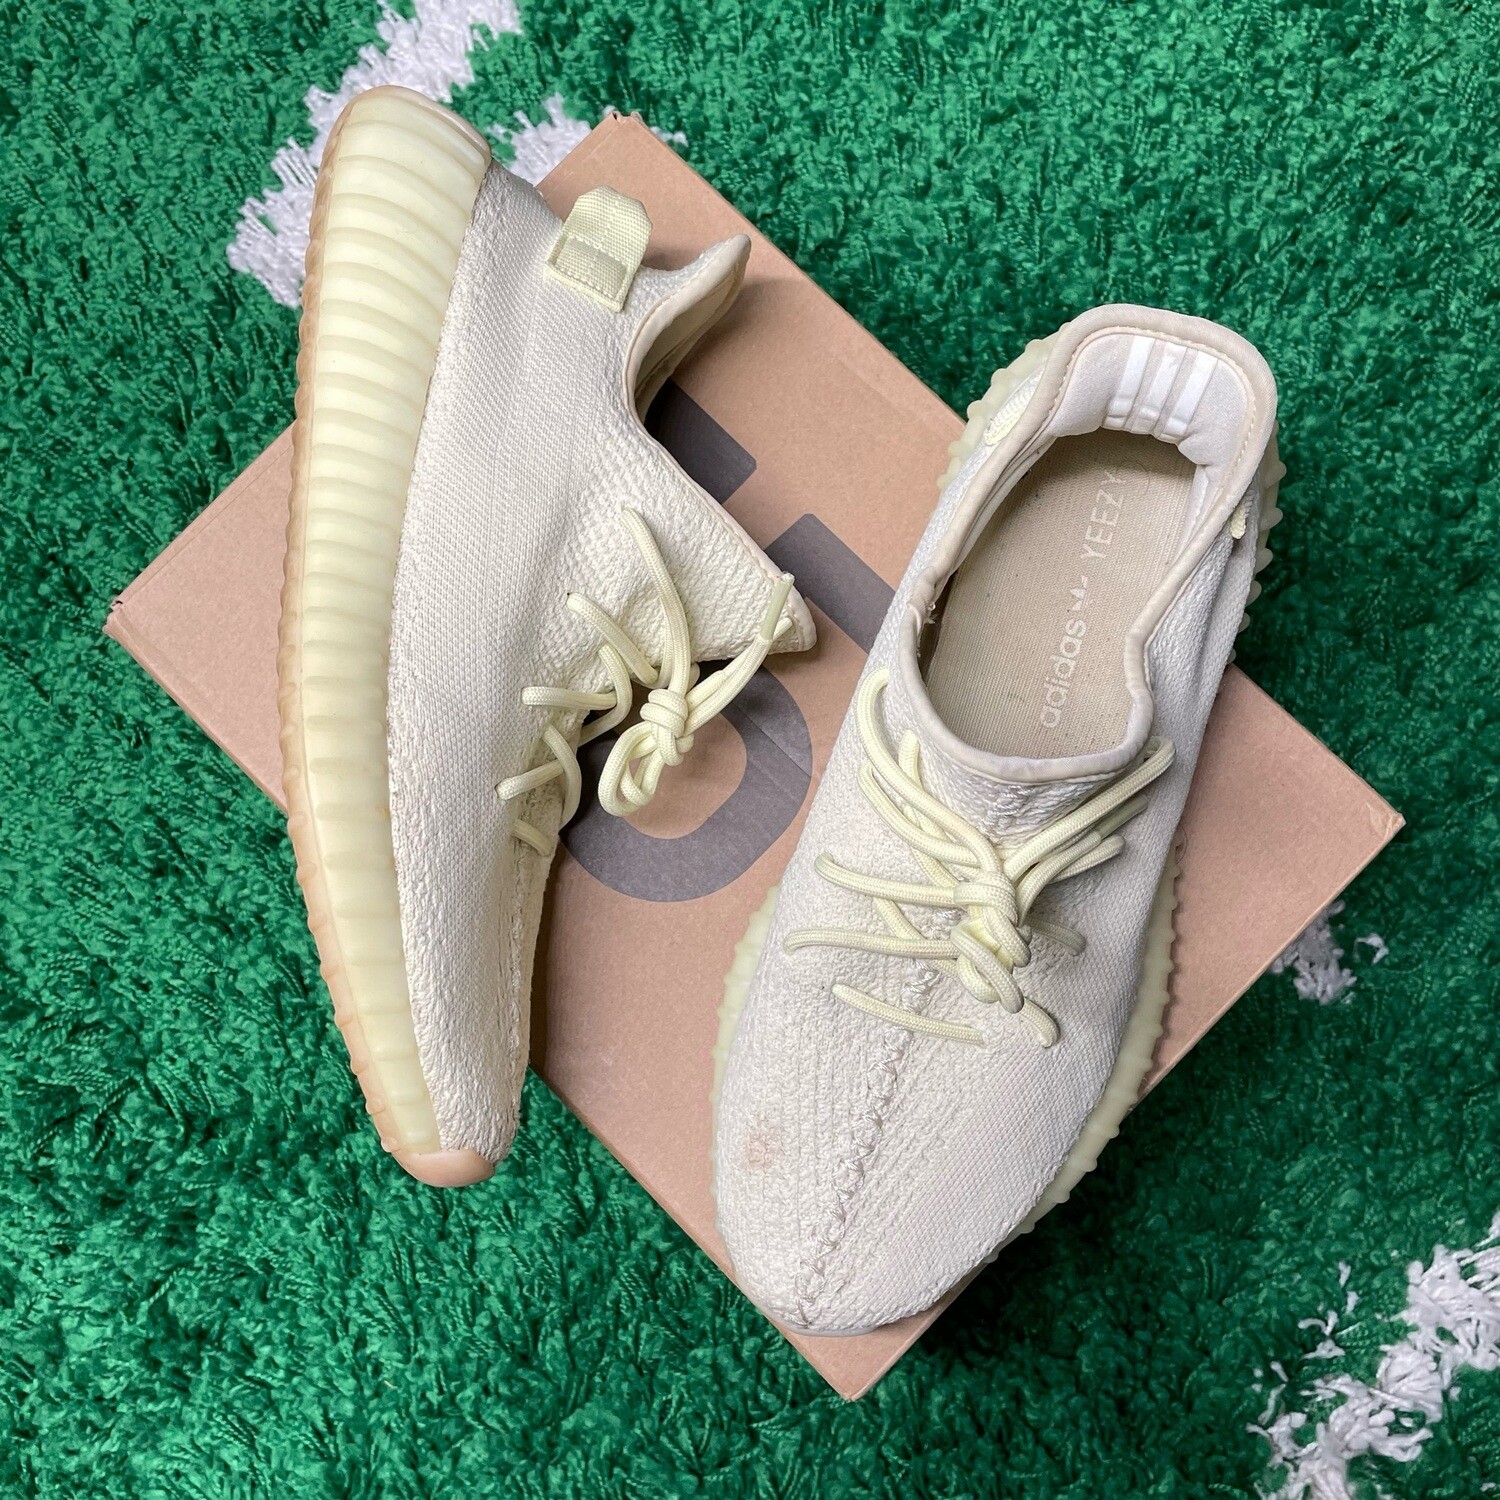 Adidas Yeezy Boost 350 V2 Butter Size 10.5